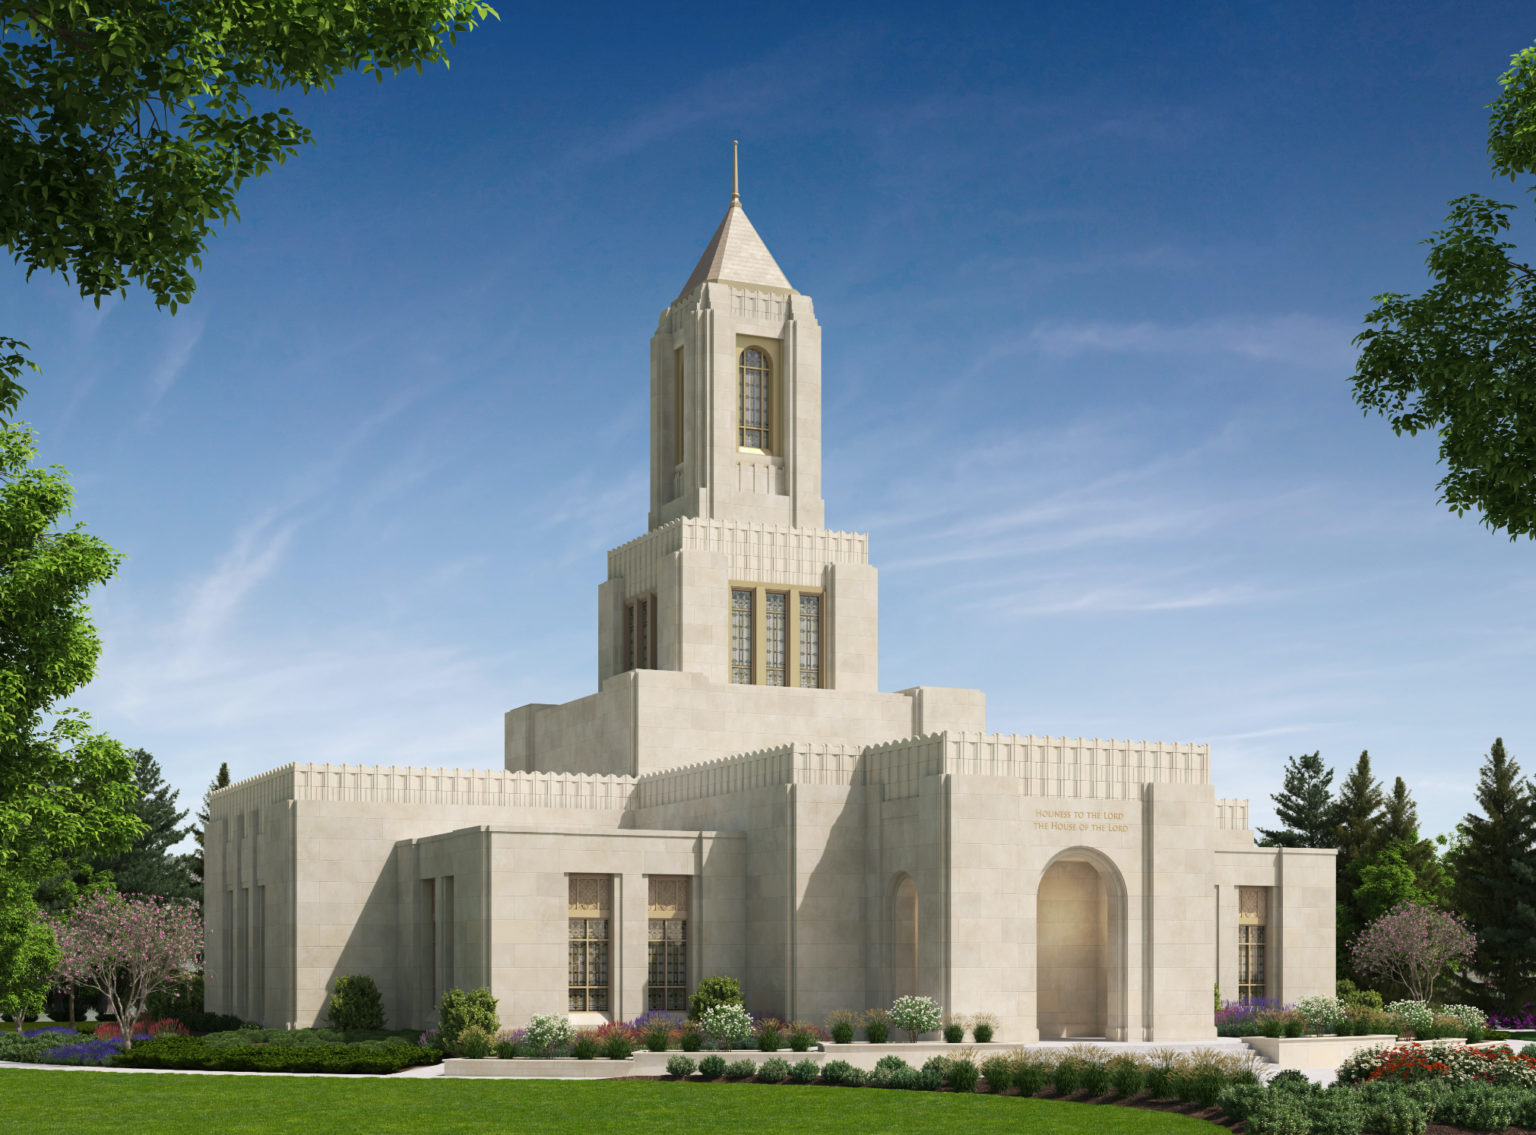 PHOTOS: The Temple of Casper was a surprising blessing to Latter day